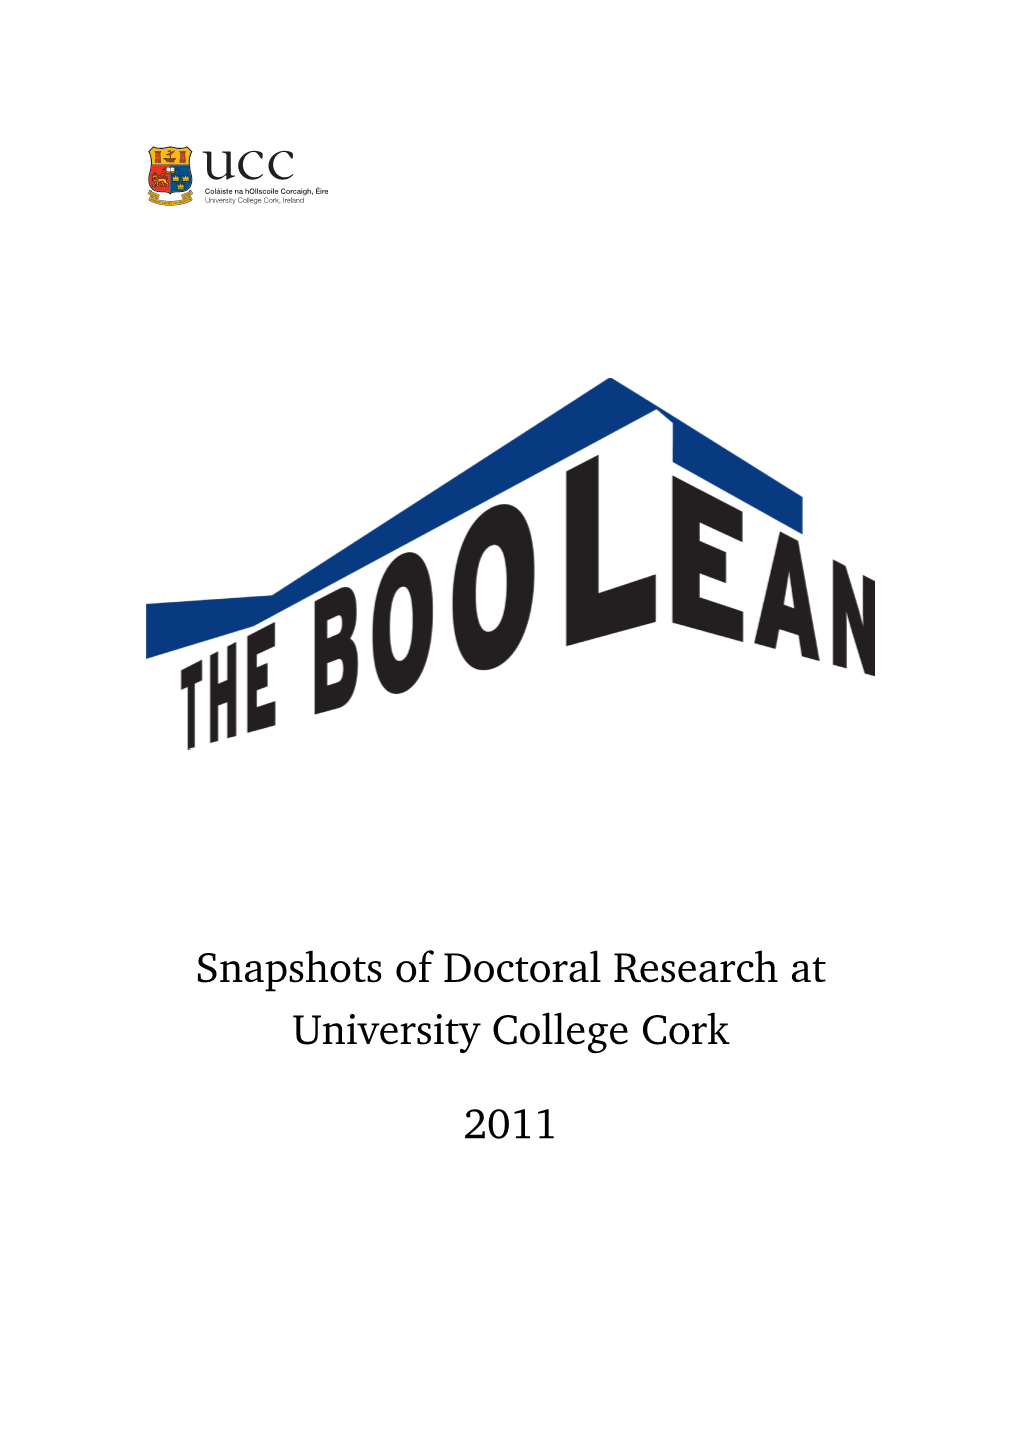 Snapshots of Doctoral Research at University College Cork 2011